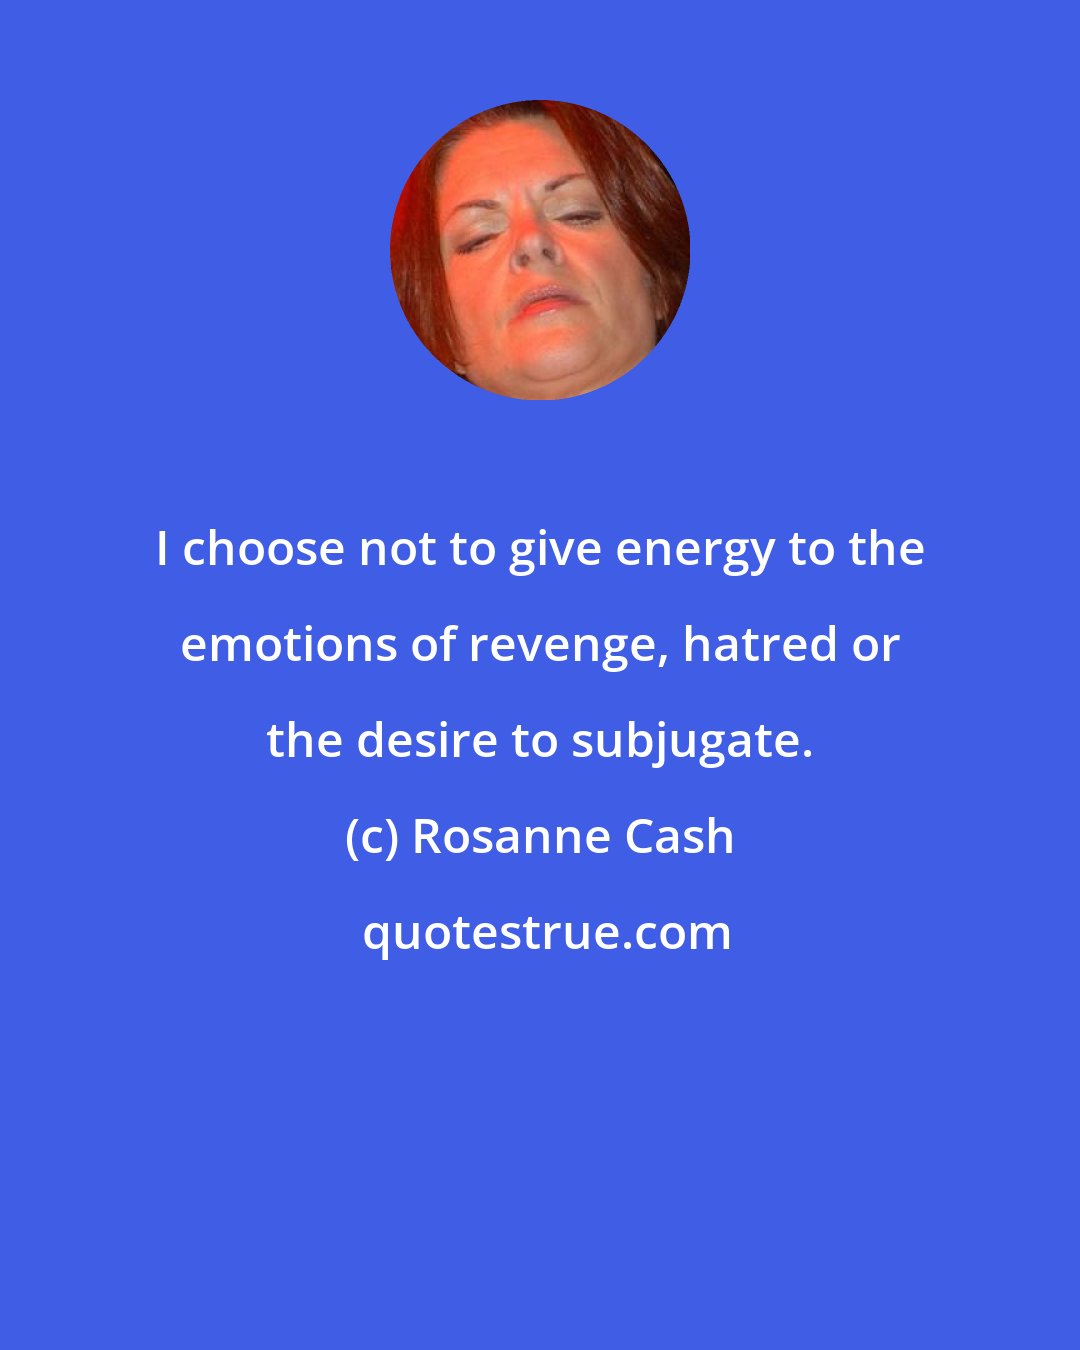 Rosanne Cash: I choose not to give energy to the emotions of revenge, hatred or the desire to subjugate.